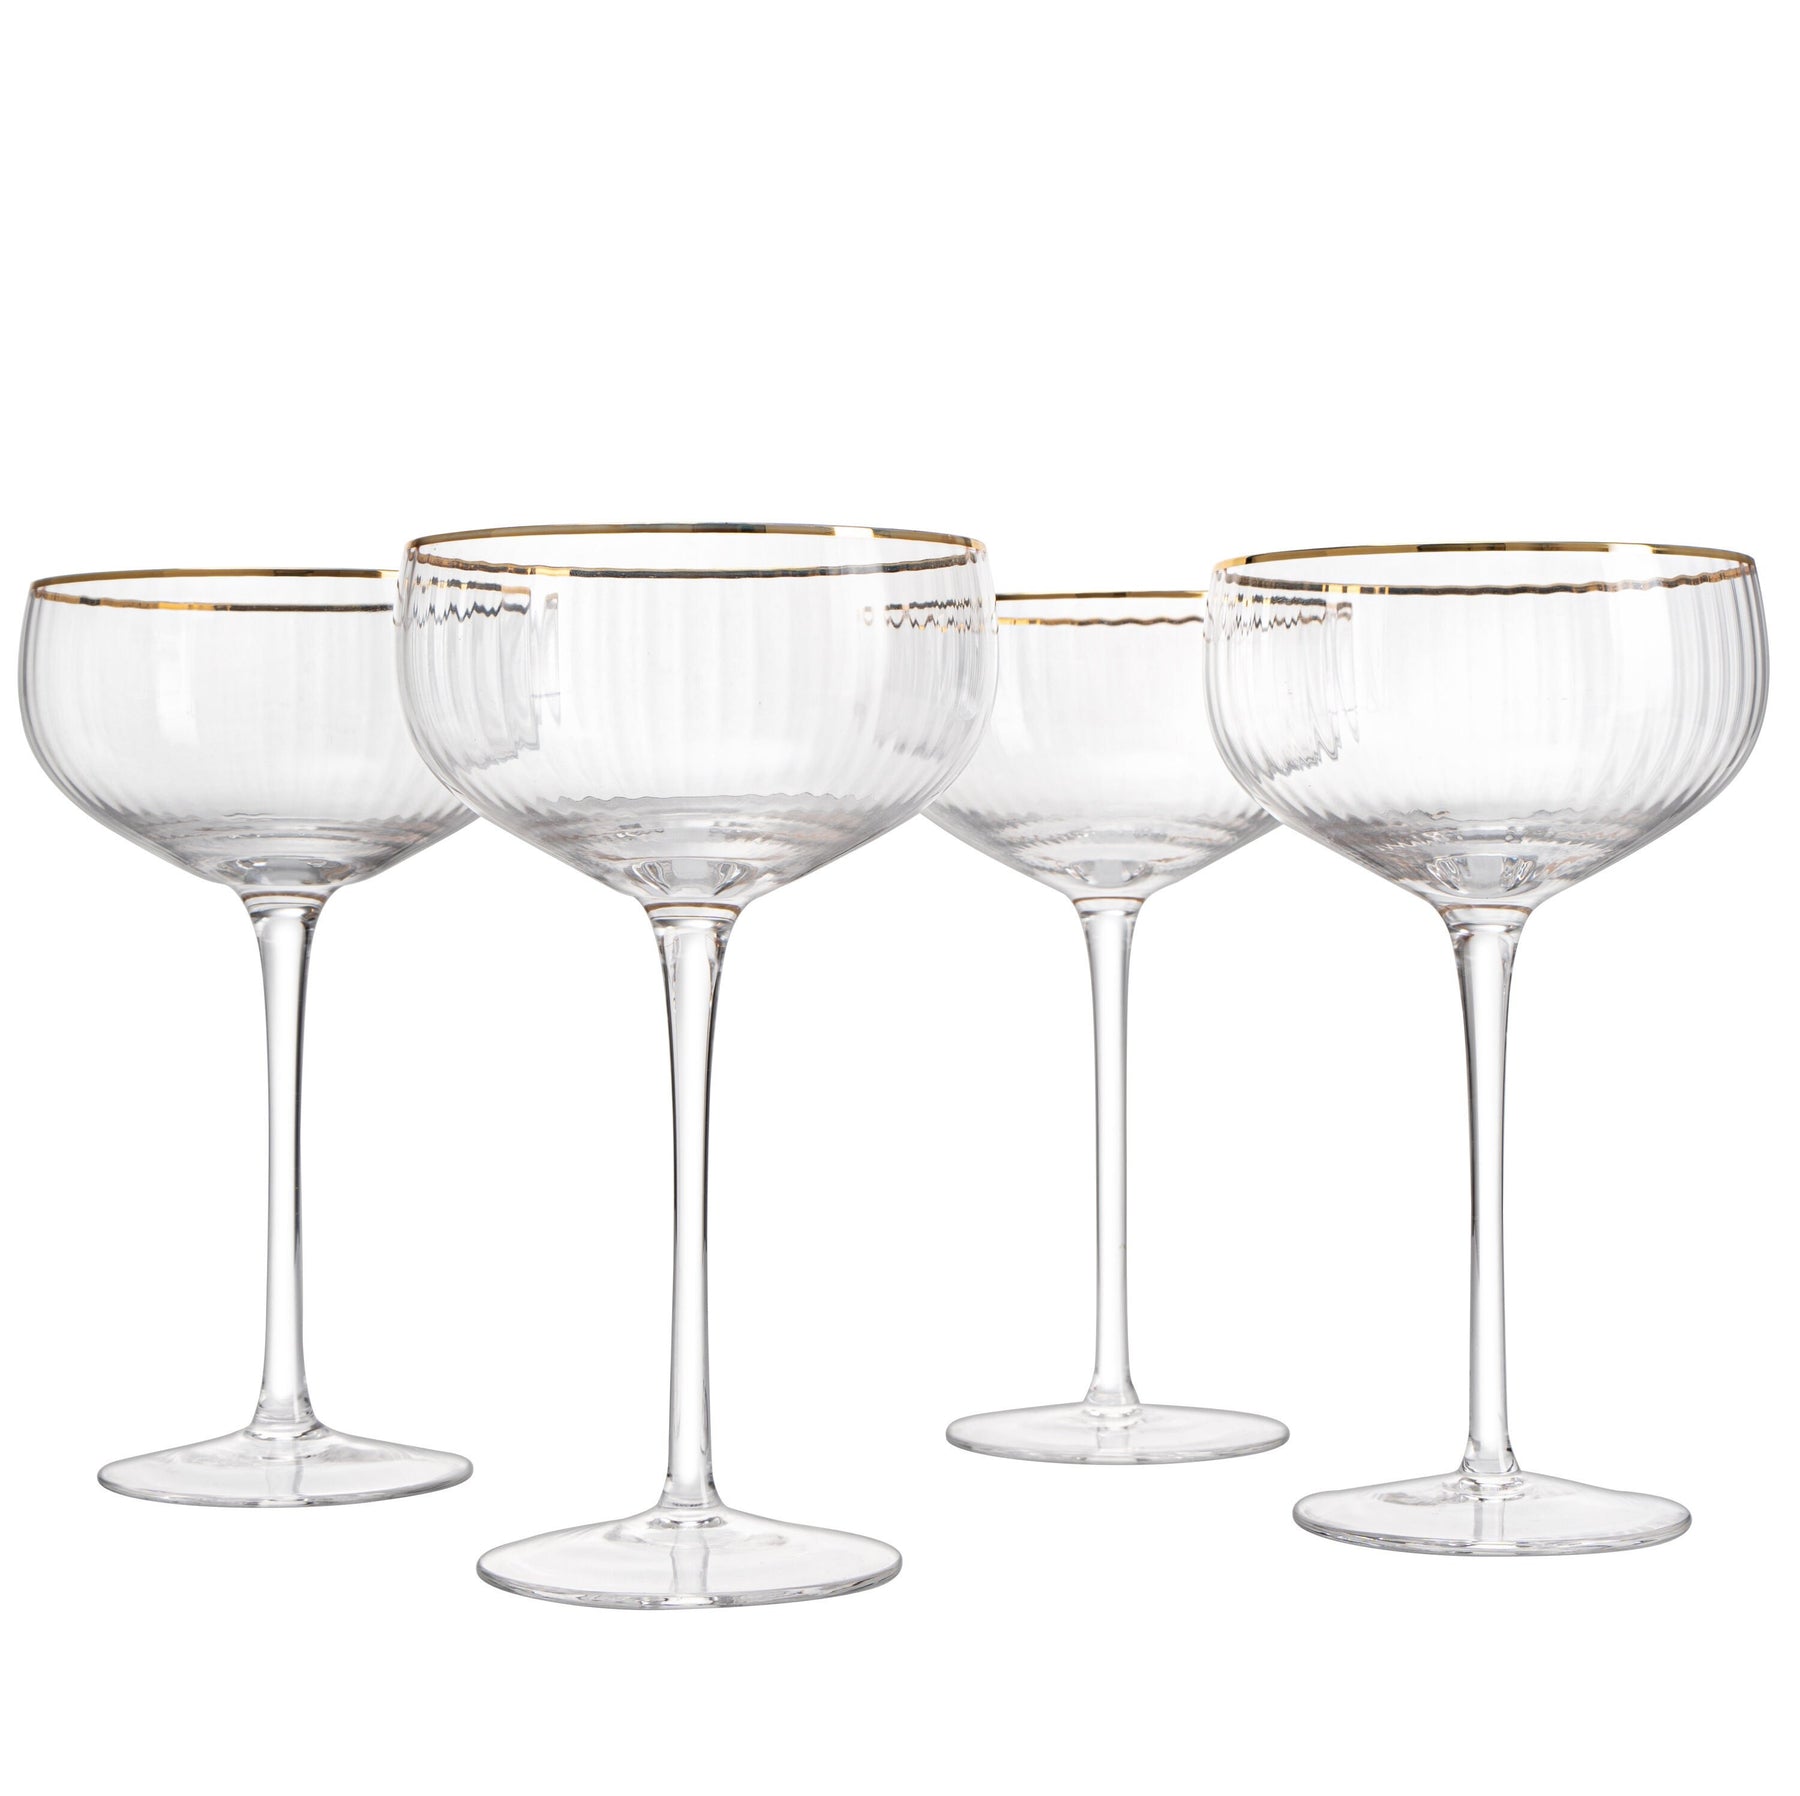 Gold Rim Ribbed Martini Glass by World Market